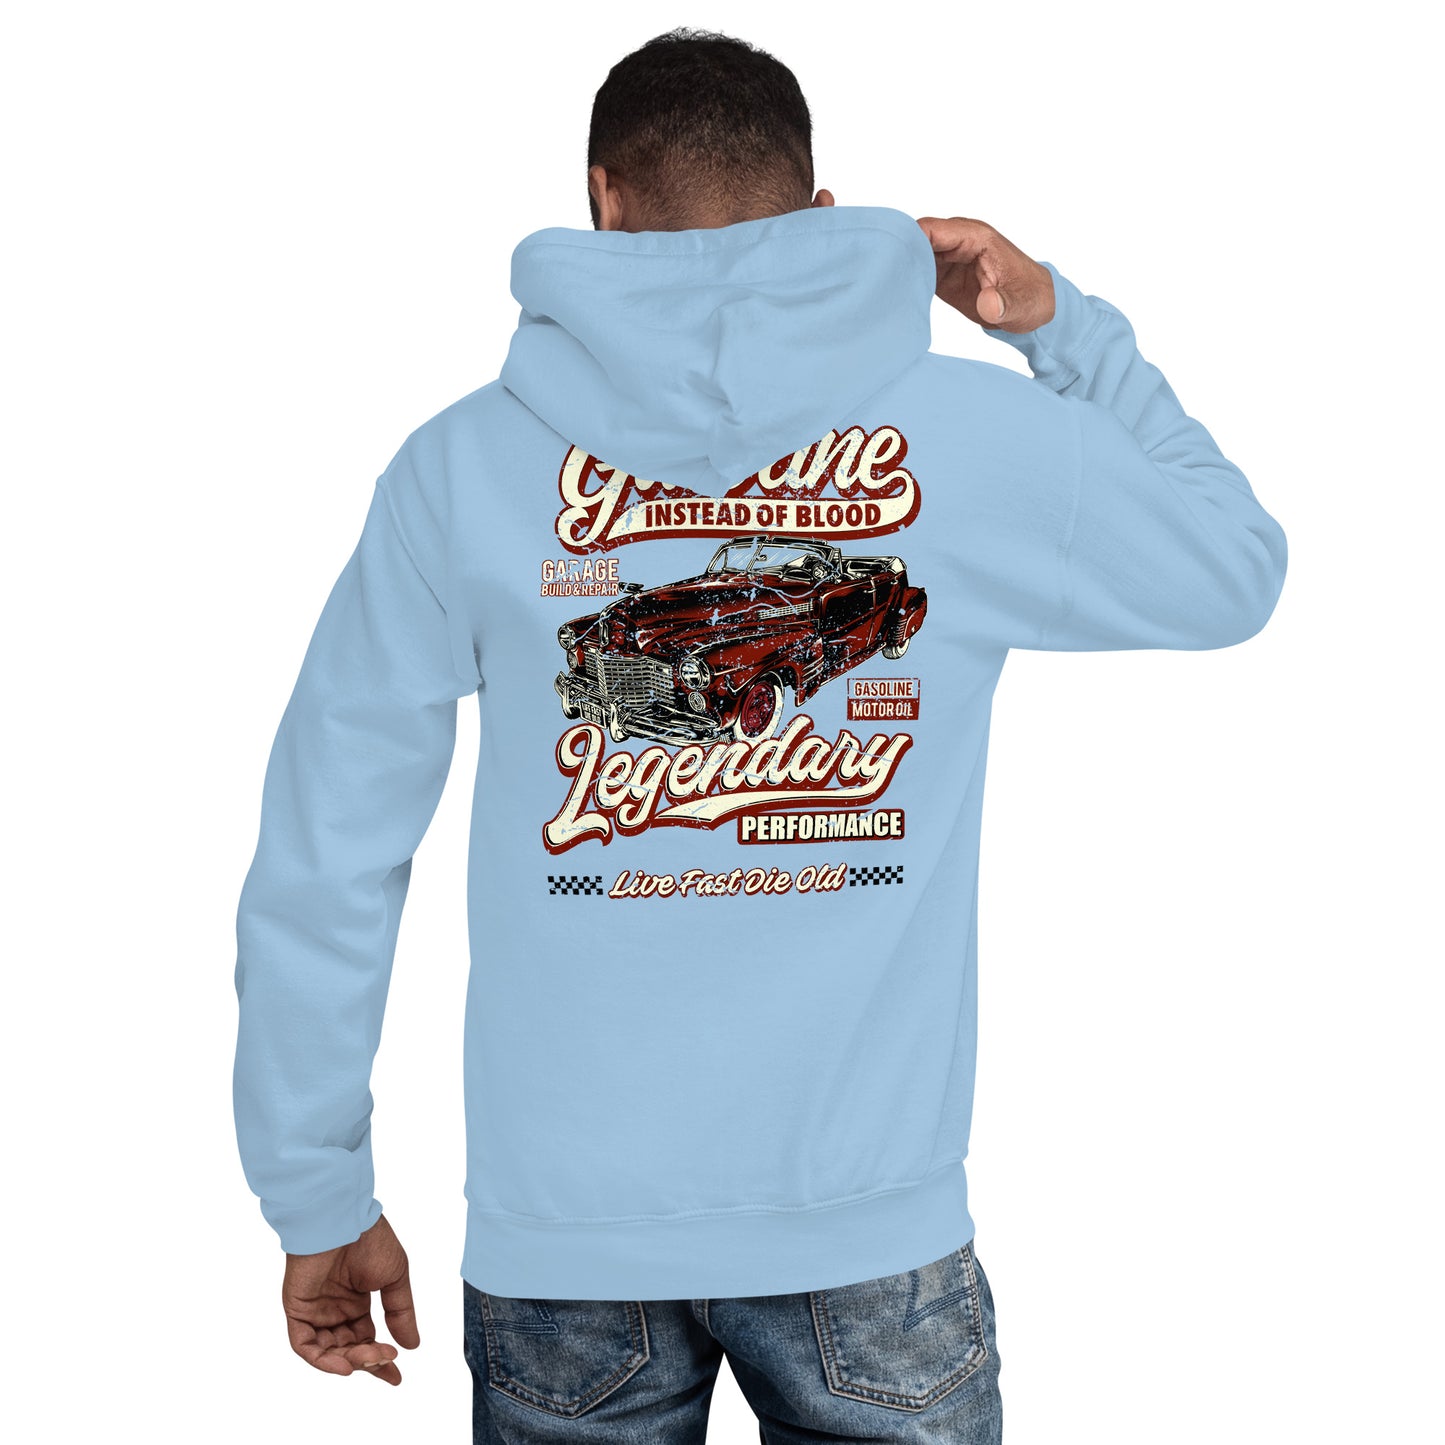 Gasoline instead of blood Hot Rod V, unisex hoodie, hooded sweater, printed on the back, S - 5XL